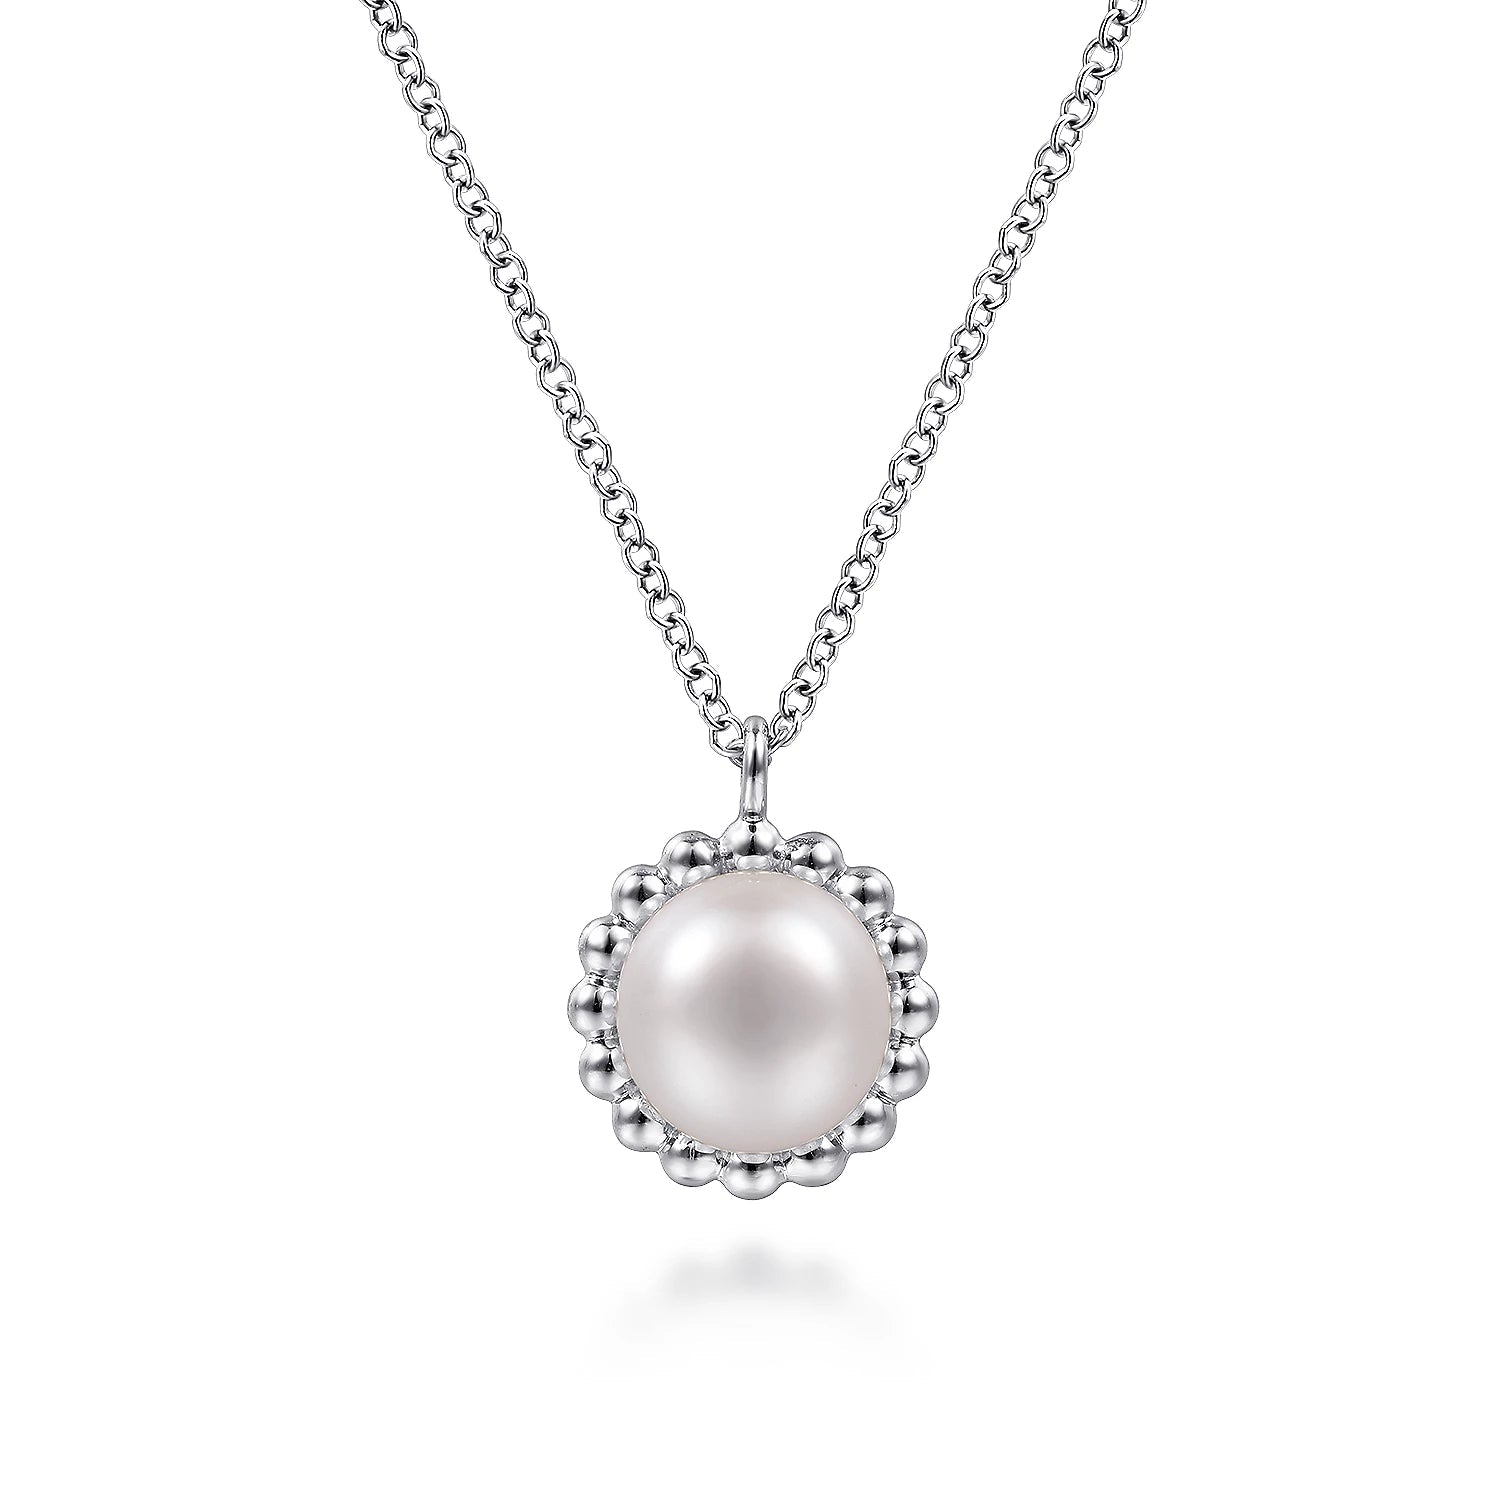 Necklace-.925 Sterling Silver pearl with beaded border - Gaines Jewelers